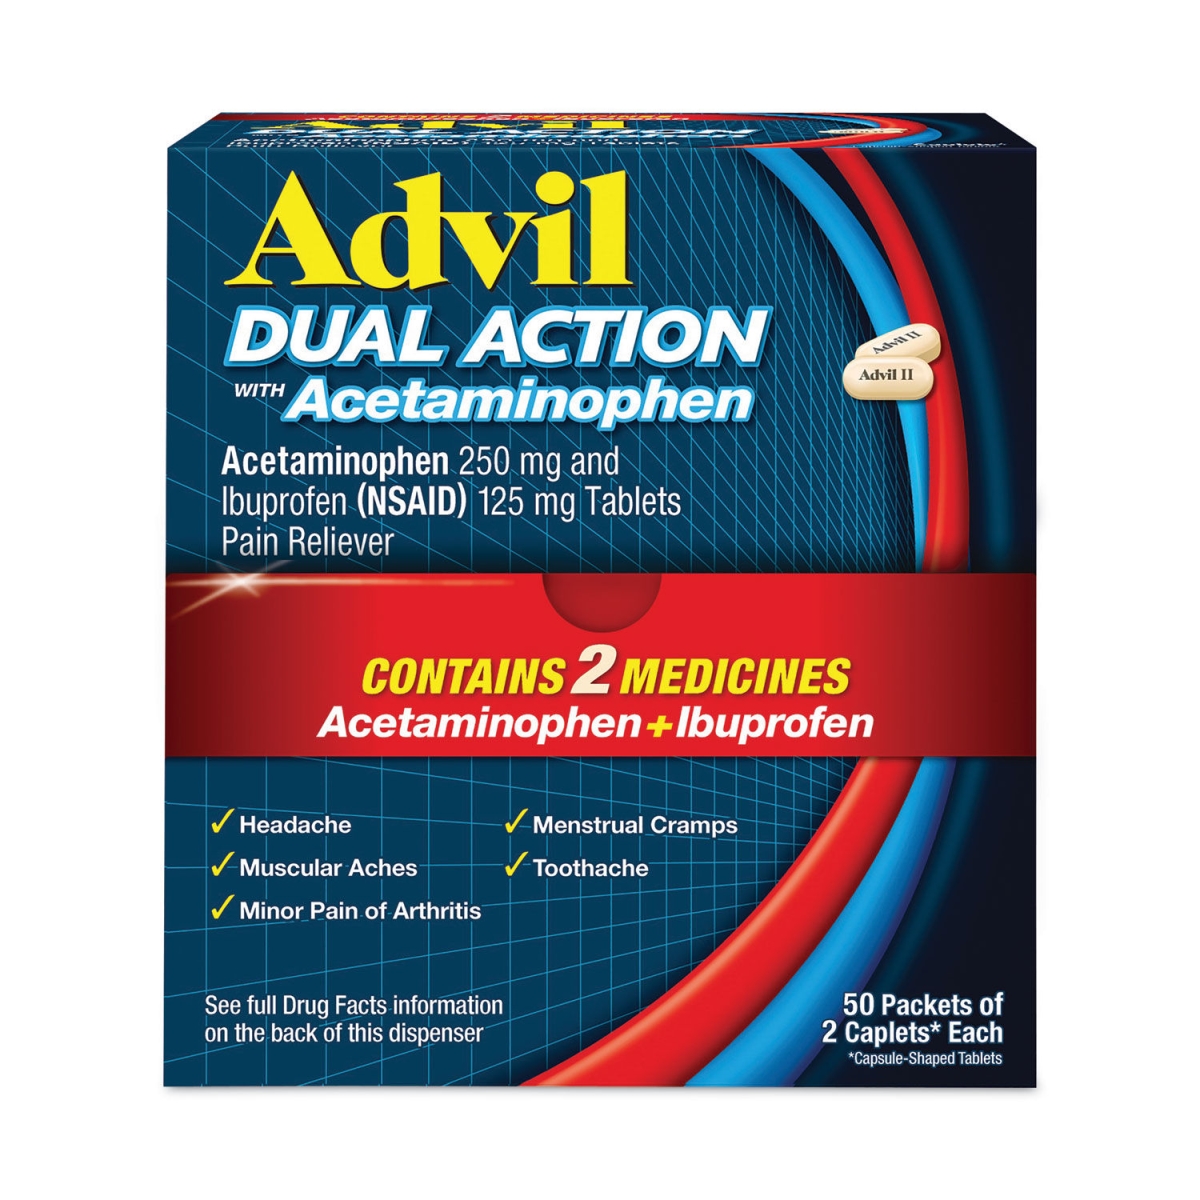 Picture of Advil AVL014795 Dual Action Tablet with Acetaminophen & Ibuprofen - Pack of 2 - 50 Count